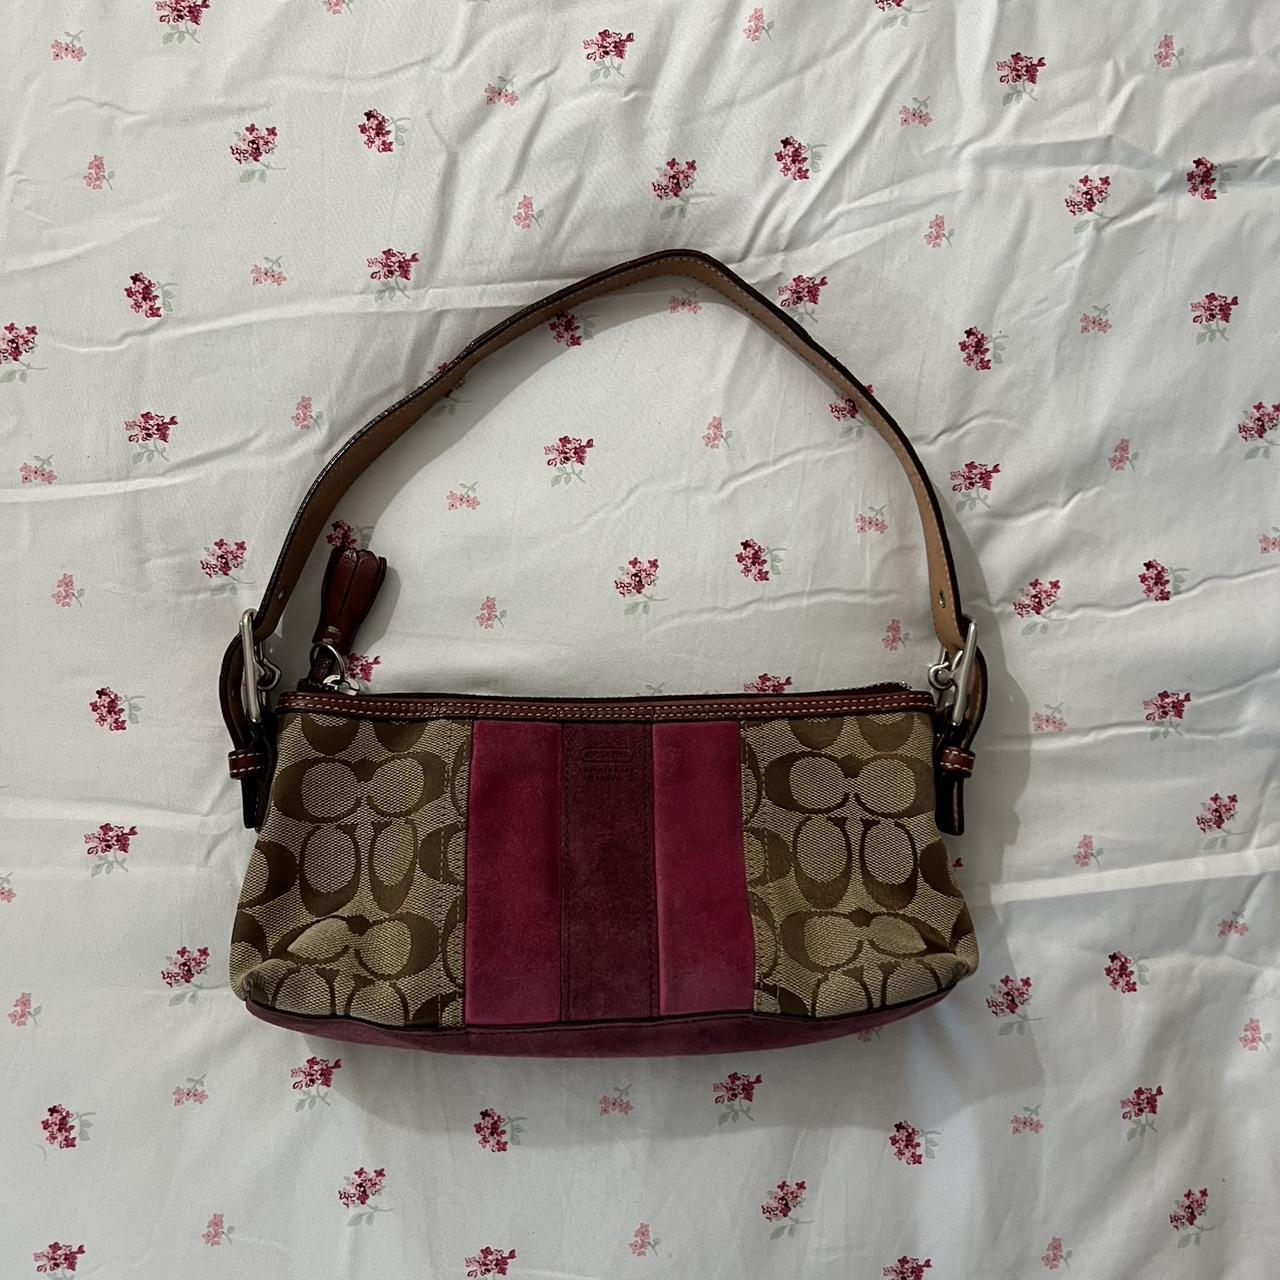 pricing help!!! early 2000s pink monogram coach shoulder bag/purse